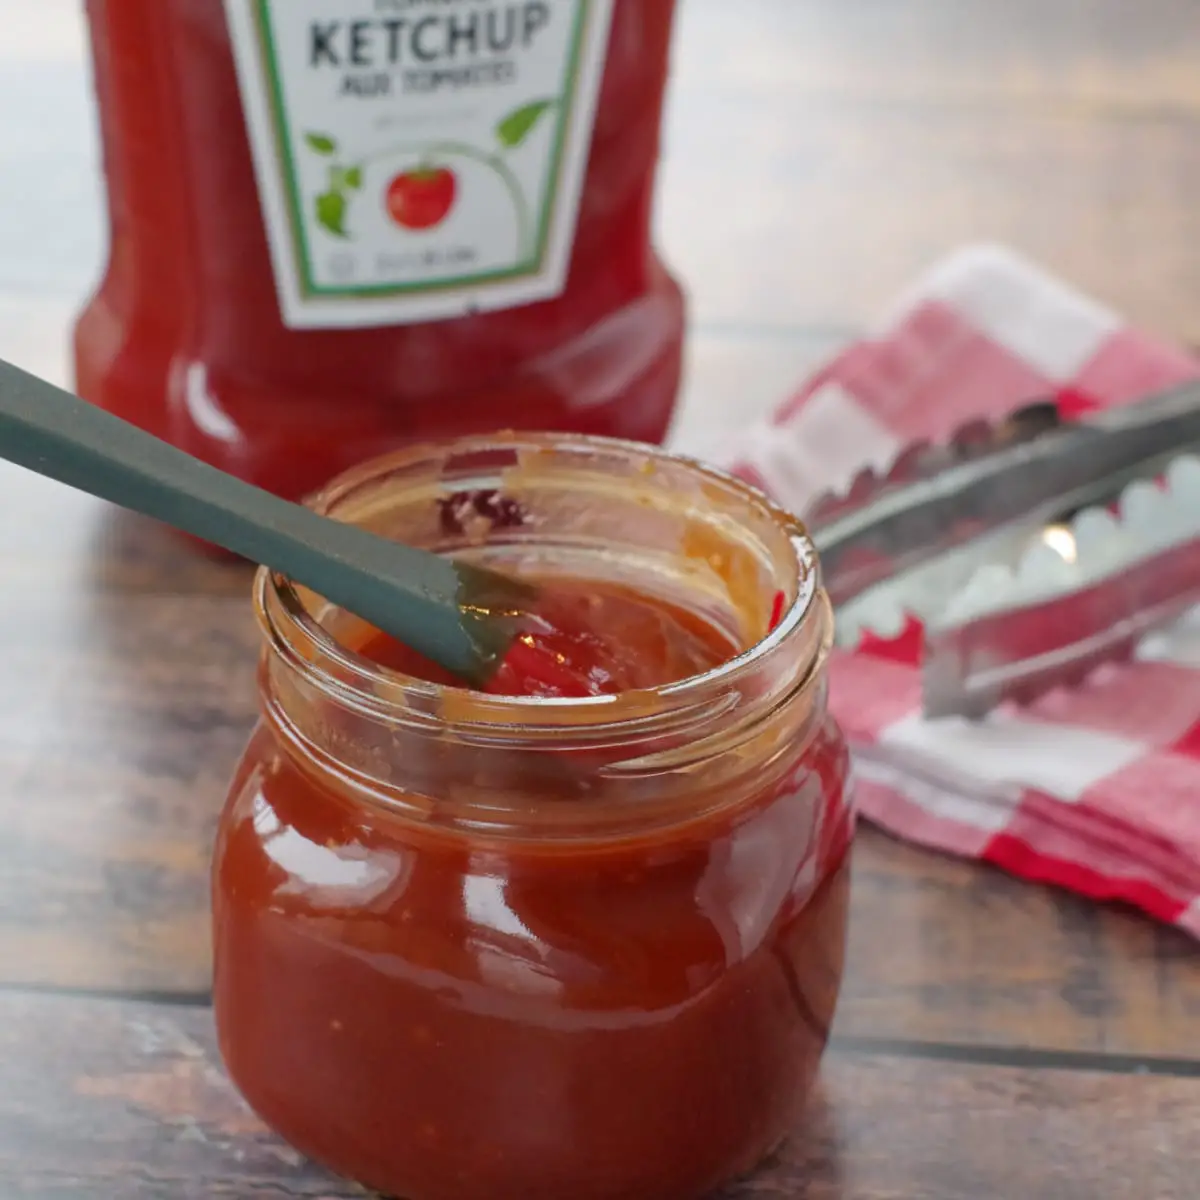 Easy Bbq Sauce with ketchup (homemade)